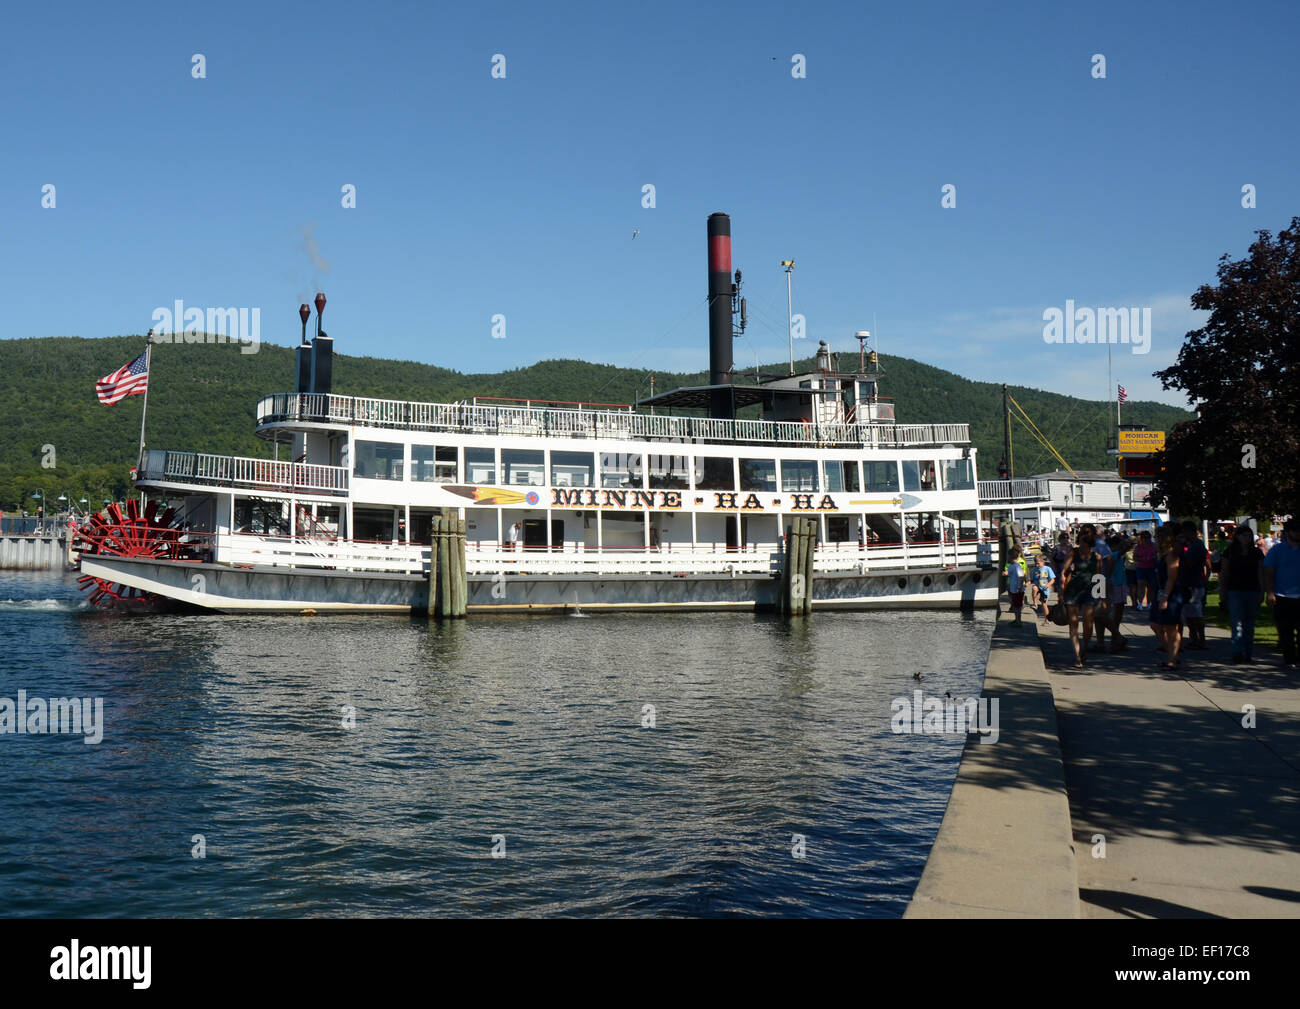 Lake George, NY - August 7, 2012: Tourists enjoy a trip on Lake George in Upstate New York on a sunny day, Stock Photo